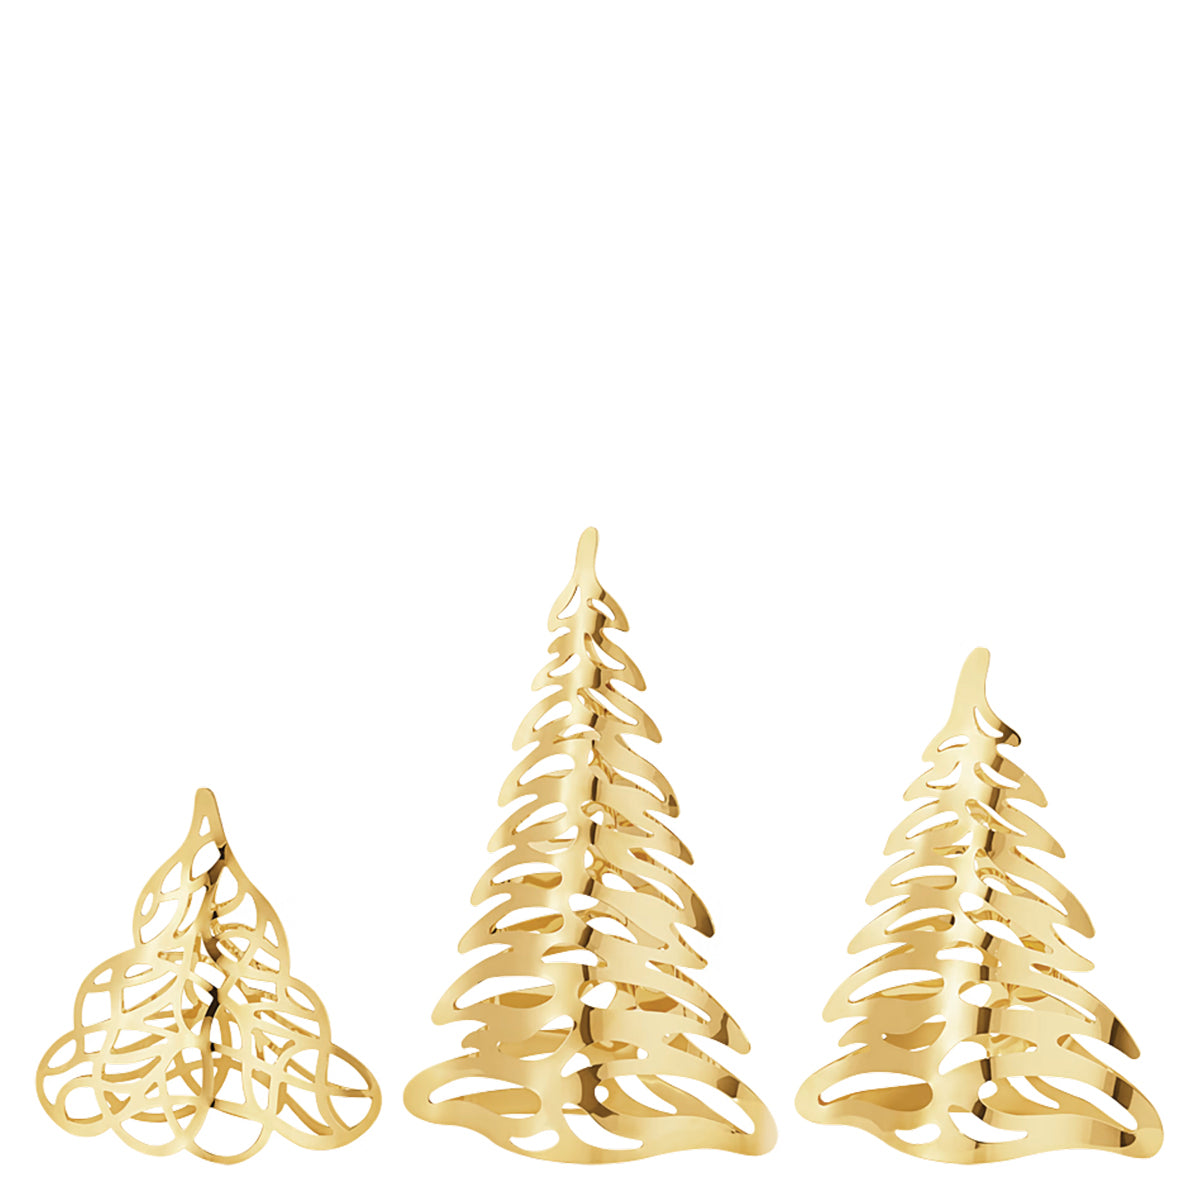 2023 Holiday Table Tree, Set of Three - 18kt Gold Plated